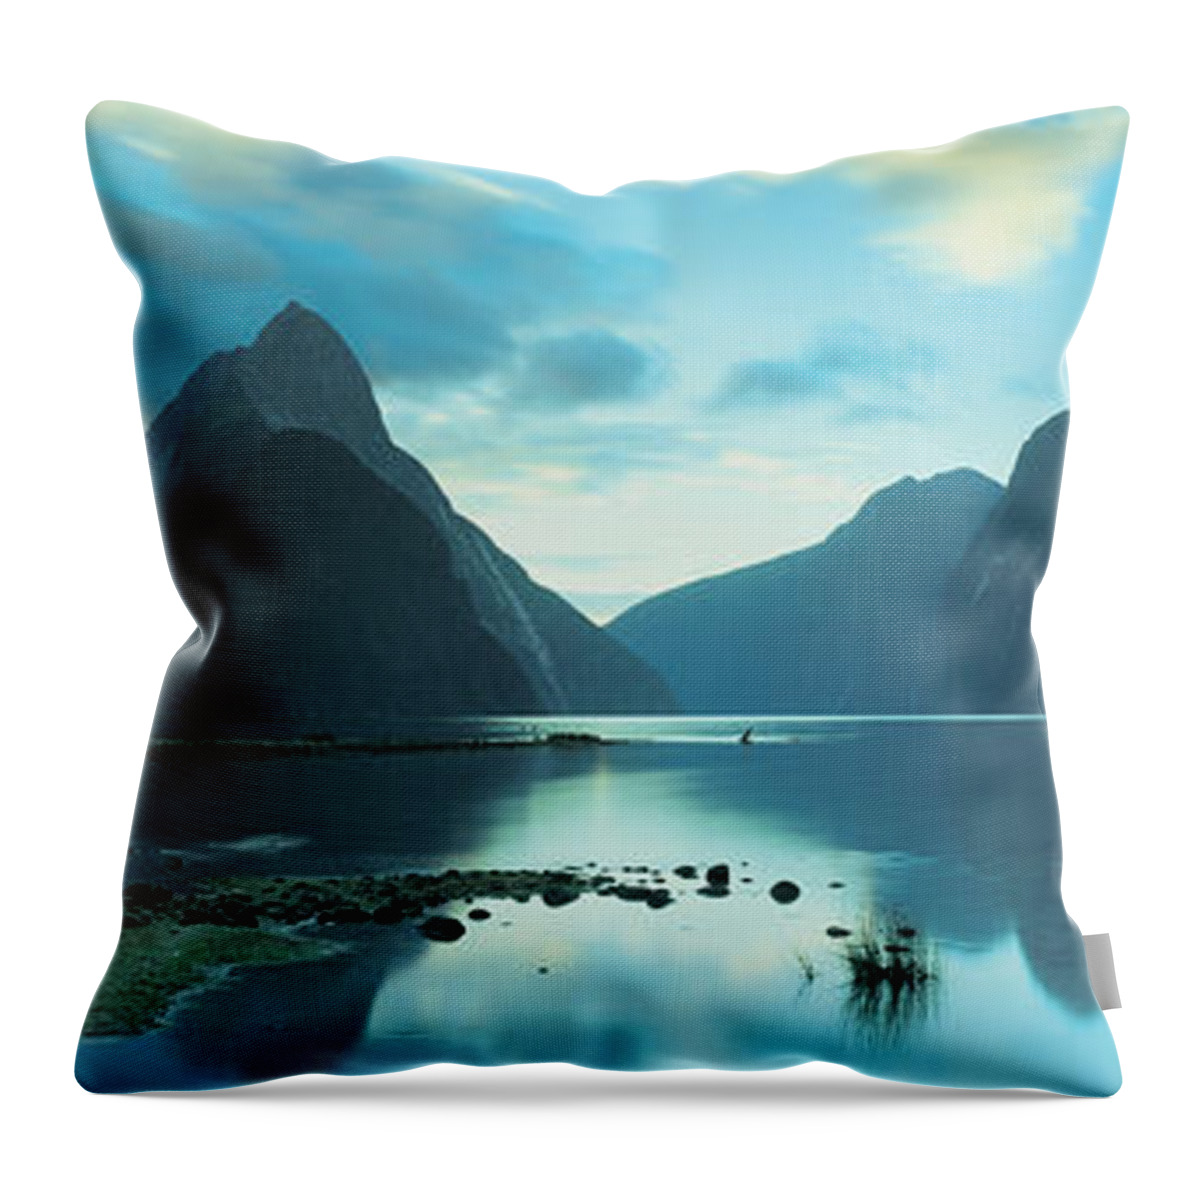 Photography Throw Pillow featuring the photograph South Island, Milford Sound, New Zealand by Panoramic Images